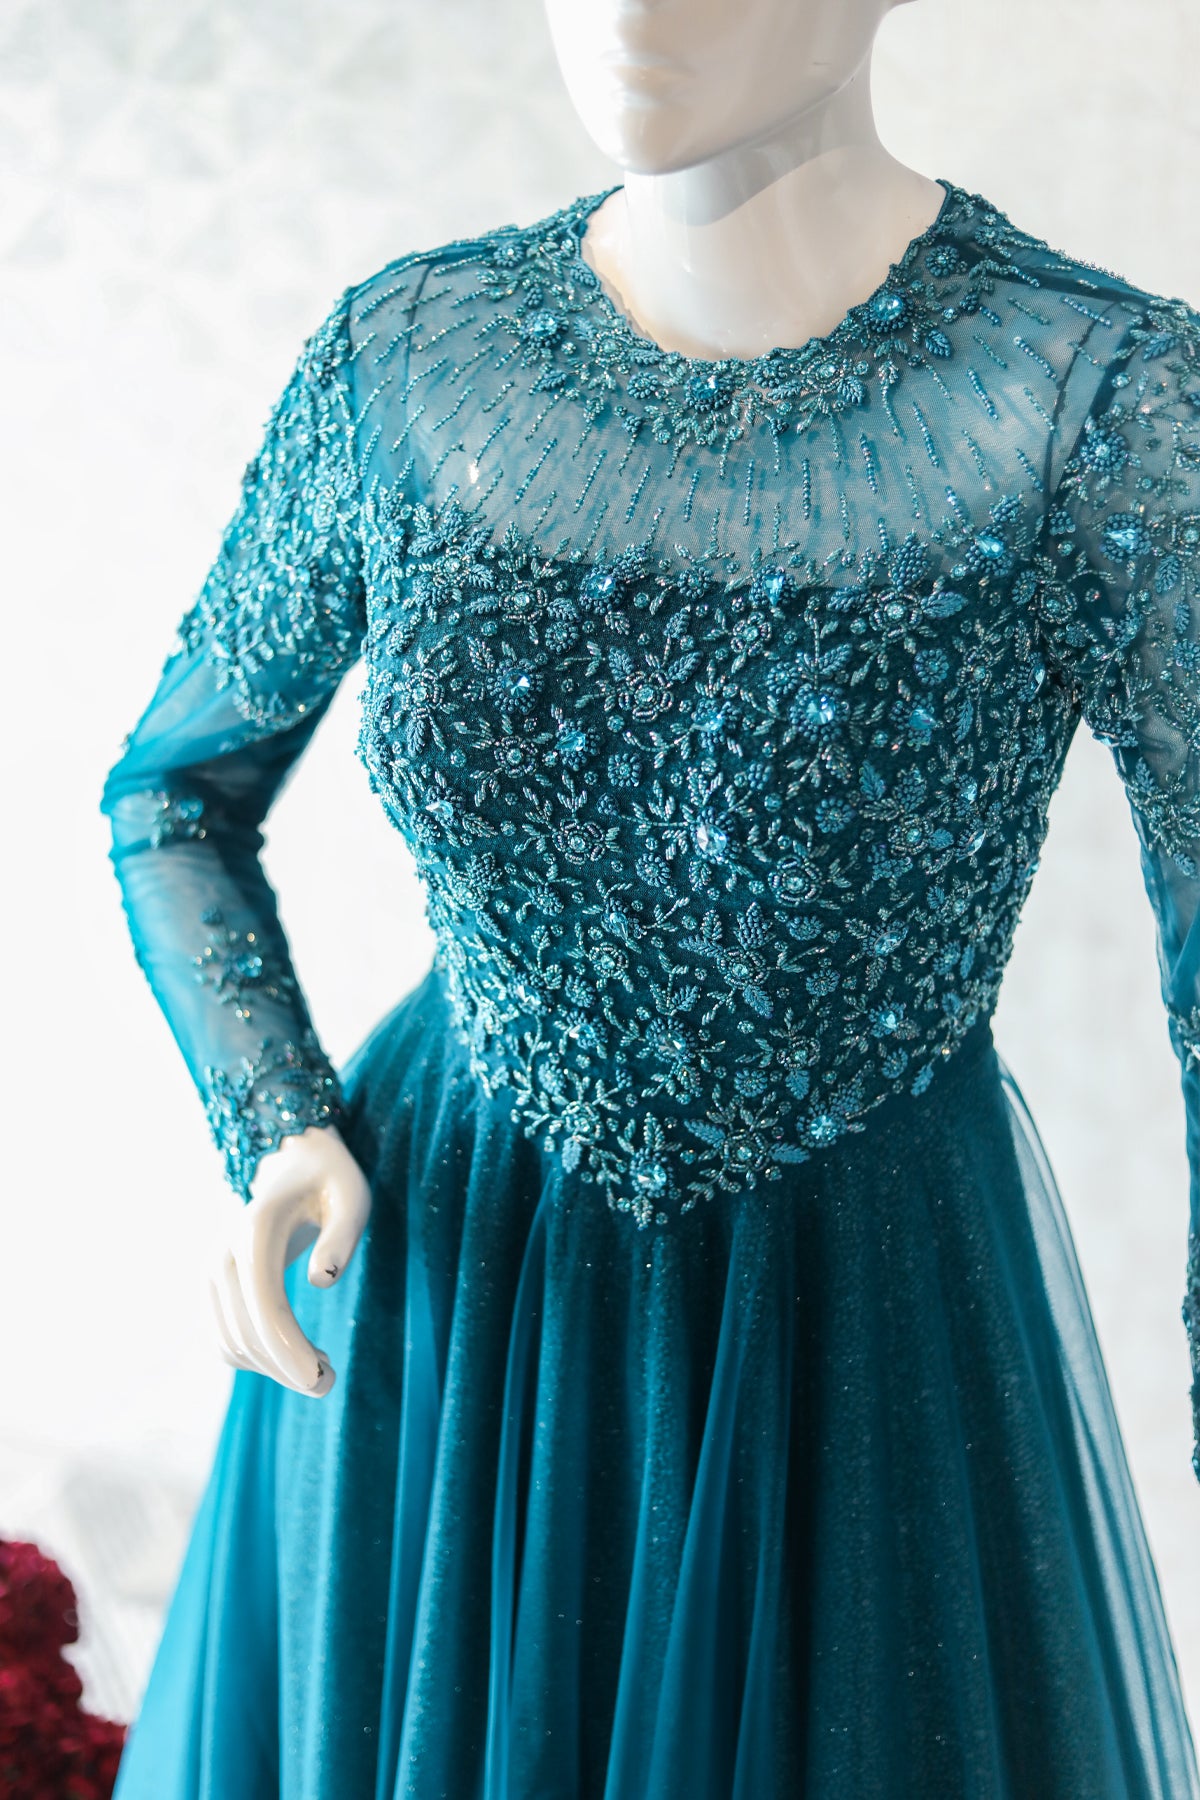 Teal Blue Gown